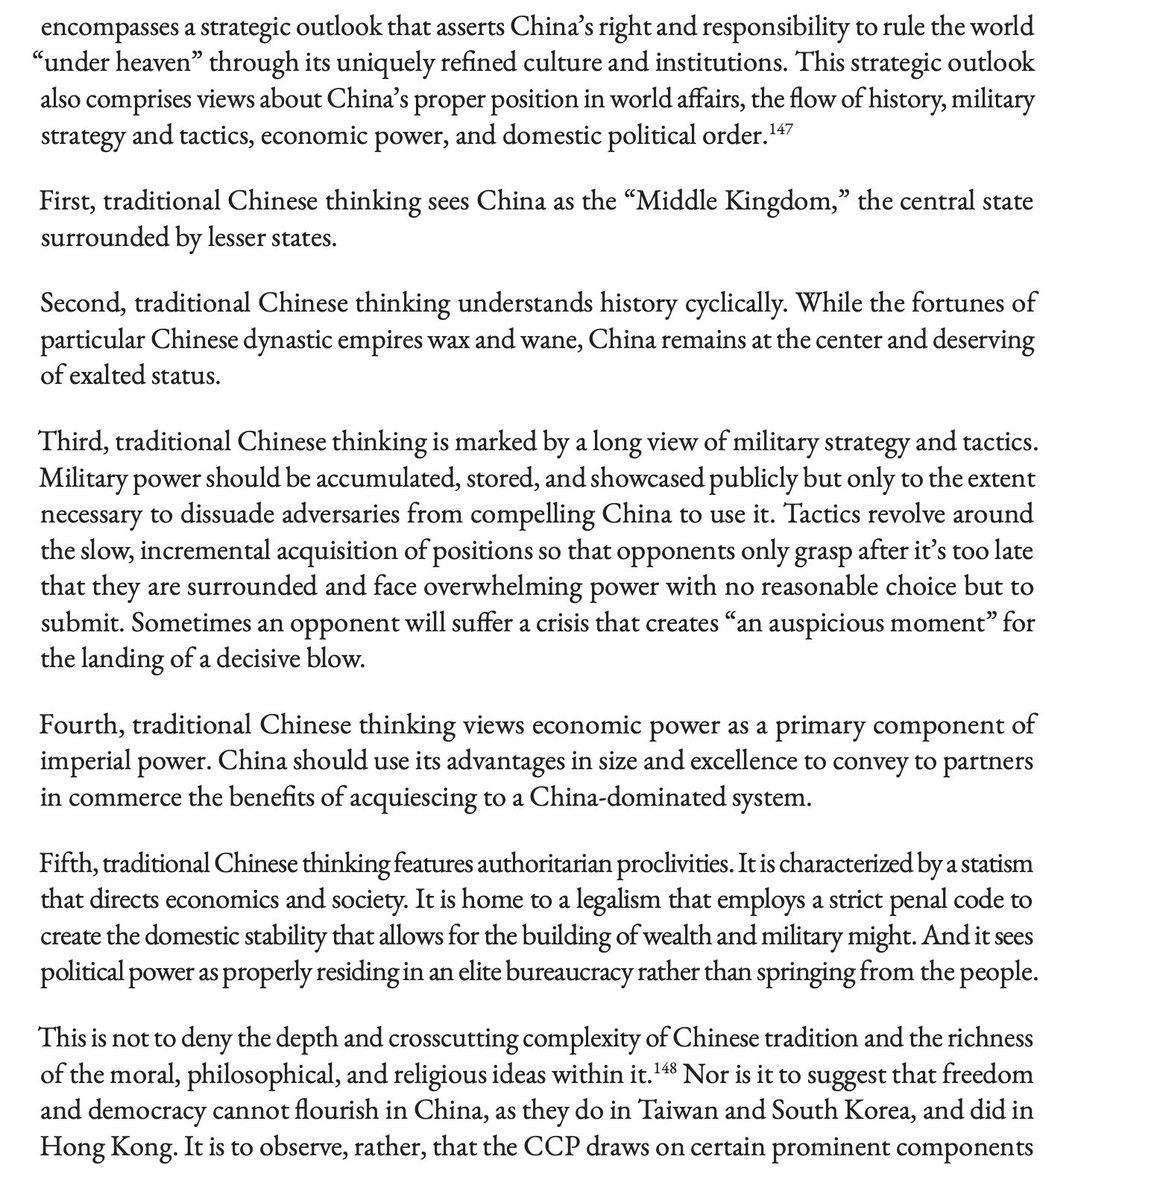 "At no point in its long history has China embraced the idea — assumed by liberal democracies and affirmed by the United Nations — of sovereign equality among nations grounded in respect for rights inherent in all persons." Instead it employs "traditional Chinese thinking." 7/n